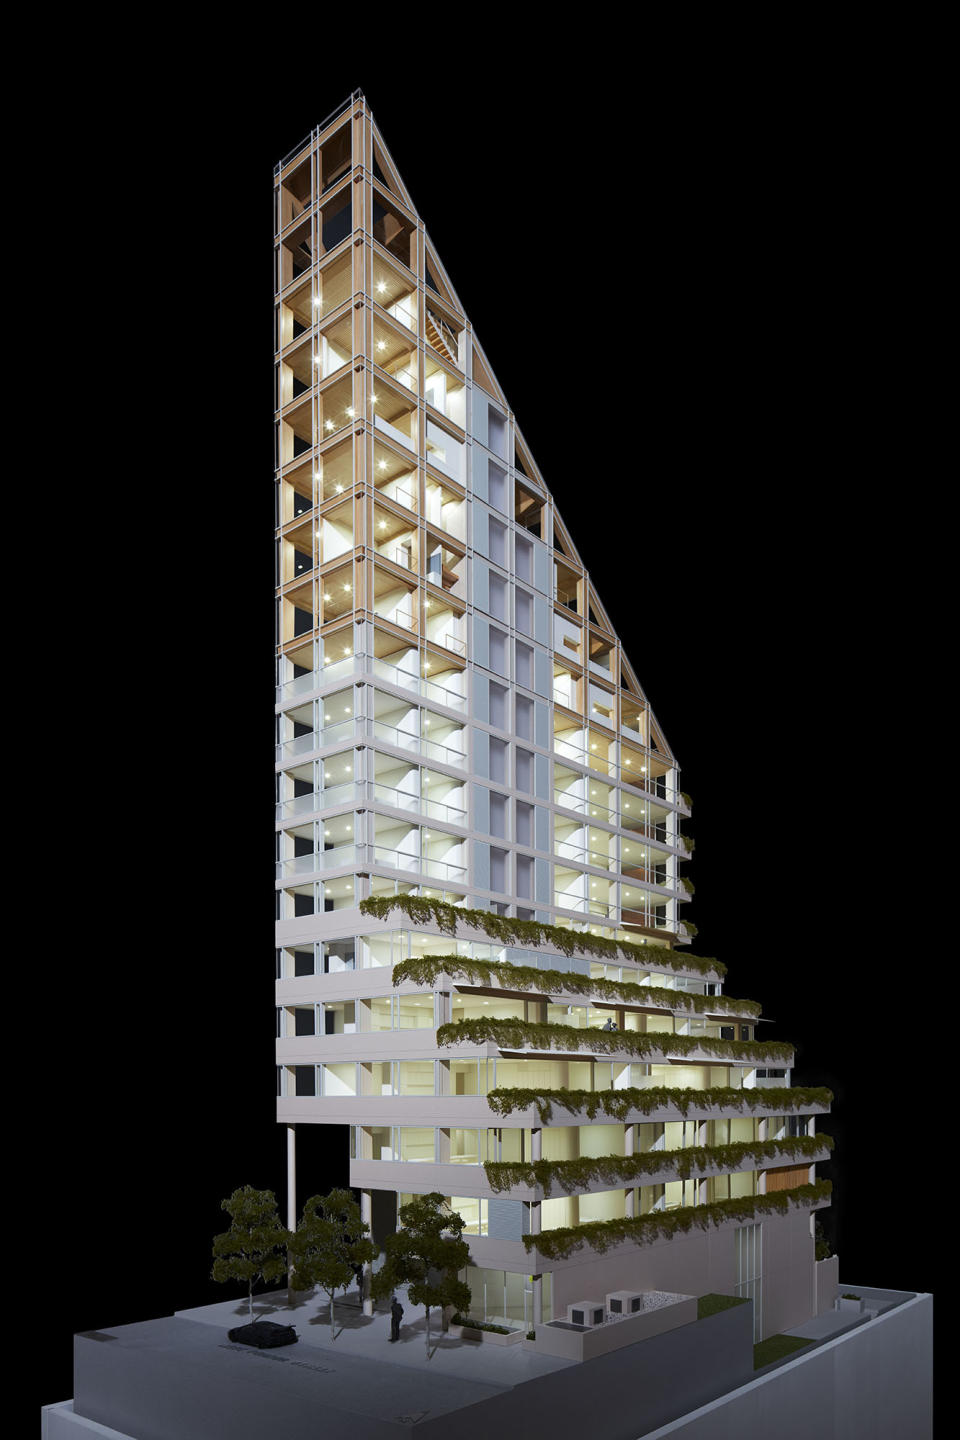 Tallest hybrid wooden structure coming to Vancouver